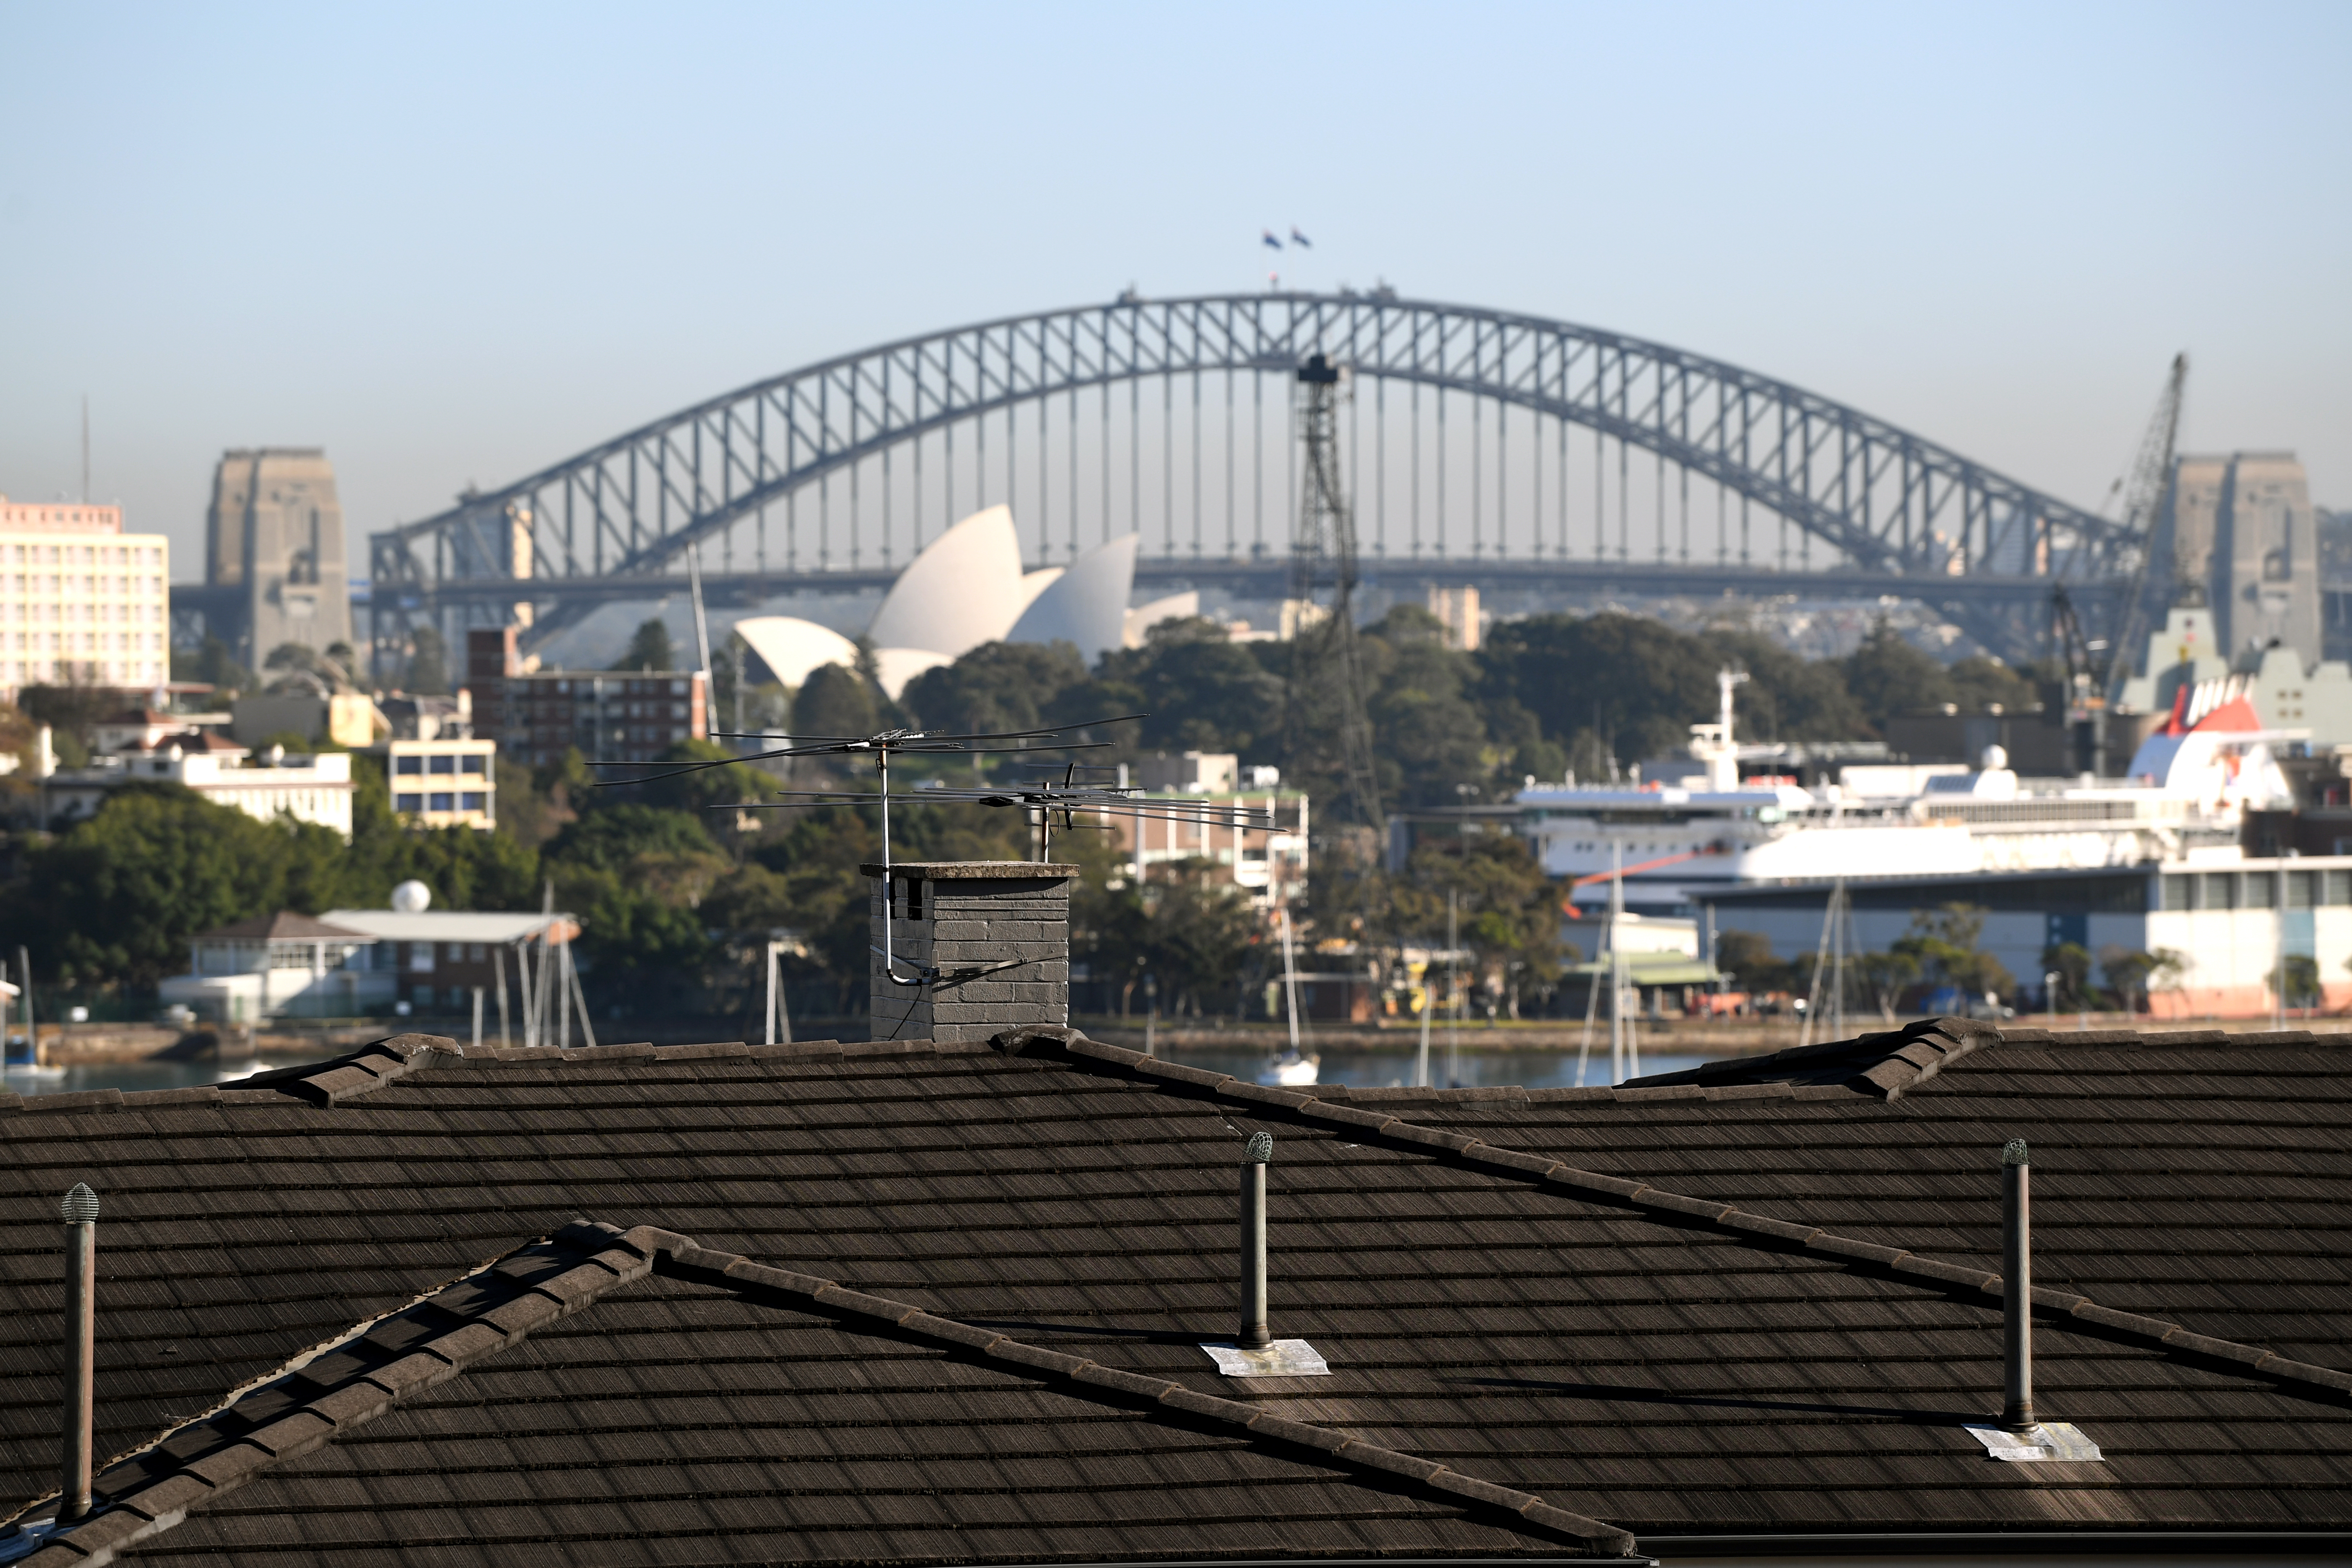 Property prices have tumbled in Sydney.